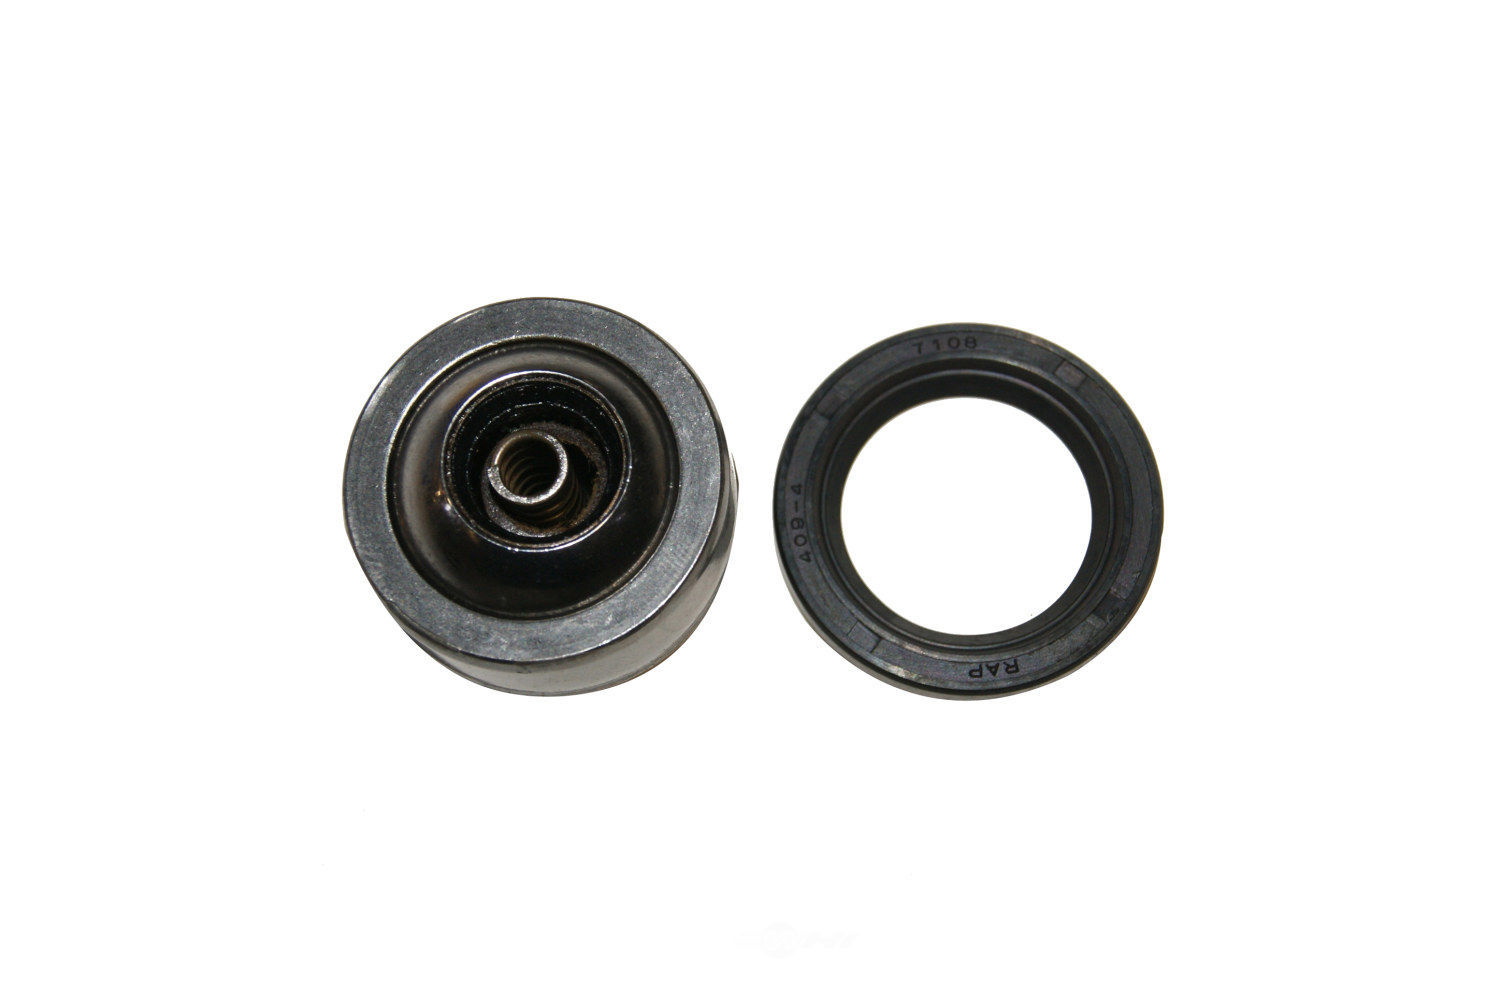 GMB - Double Cardan CV Ball Seat Repair Kit (Transfer Case To Front Axle) - GMB 261-0614